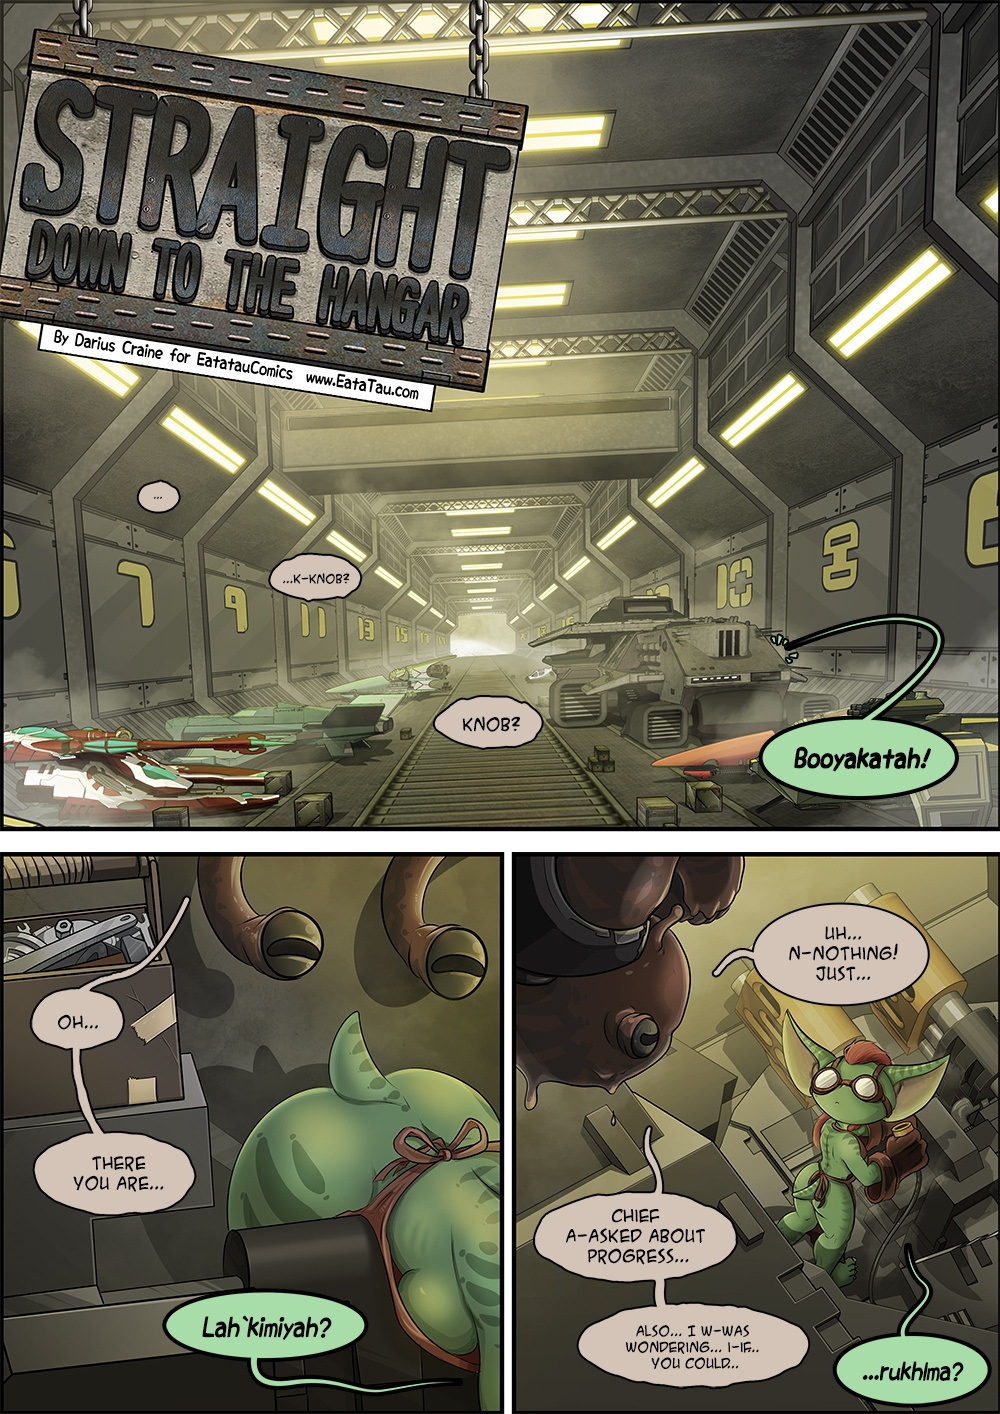 Straight Down to the Hangar - Page 1